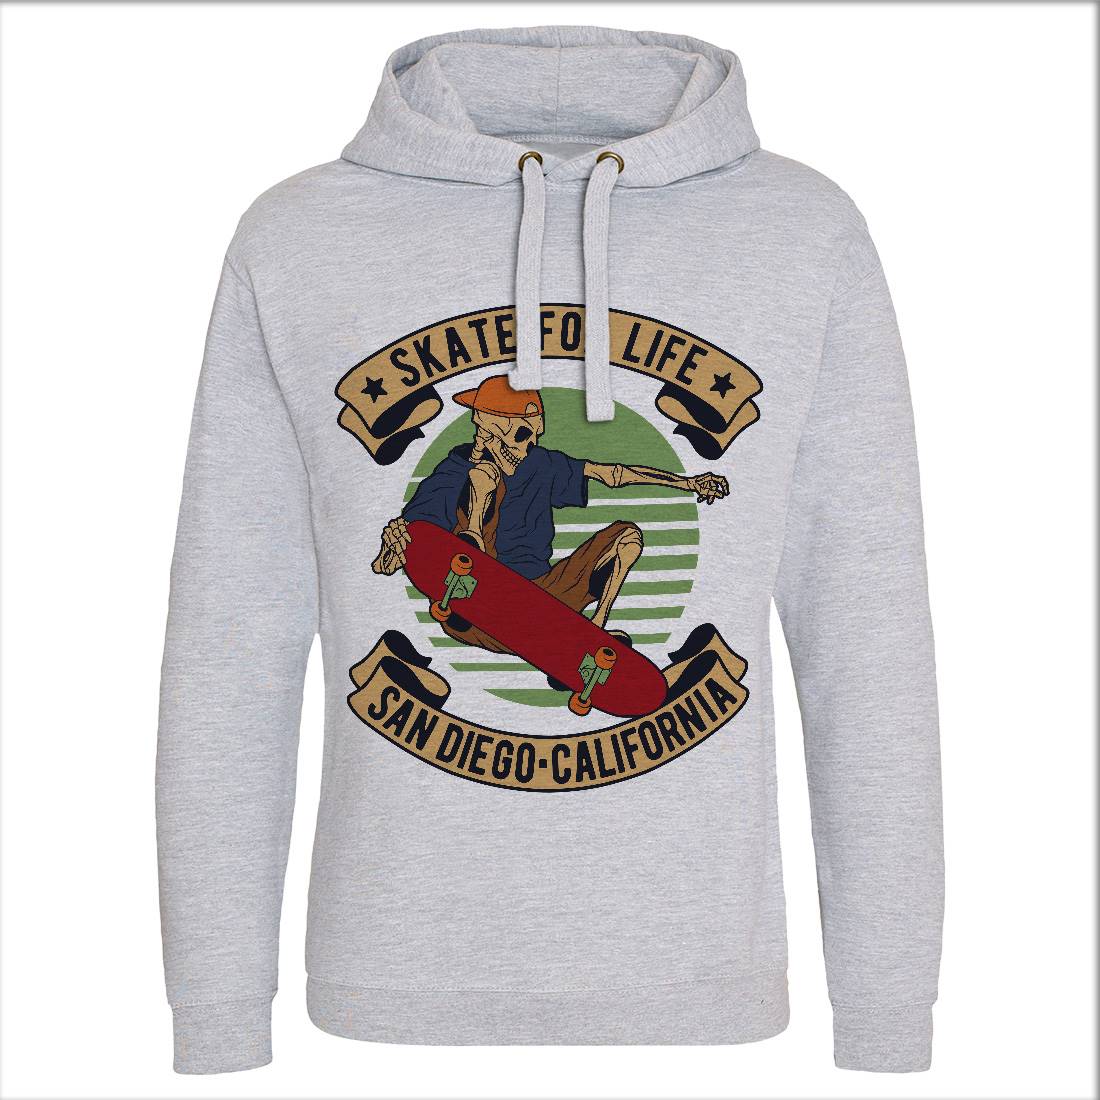 For Life Mens Hoodie Without Pocket Skate D970